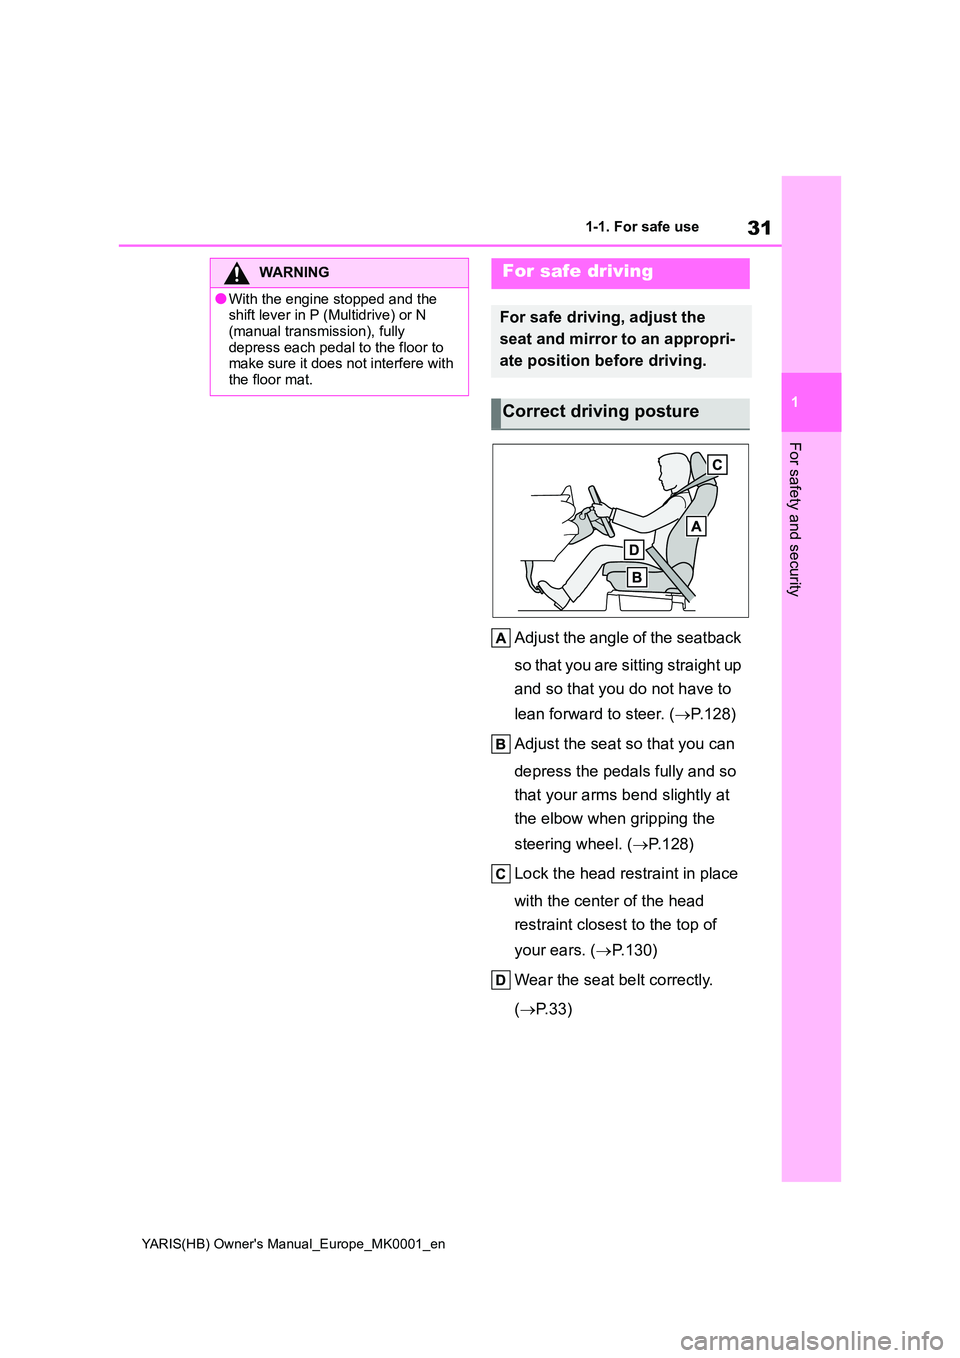 TOYOTA YARIS 2021  Owners Manual 31
1
YARIS(HB) Owners Manual_Europe_MK0001_en
1-1. For safe use
For safety and security
Adjust the angle of the seatback  
so that you are sitting straight up  
and so that you do not have to  
lean 